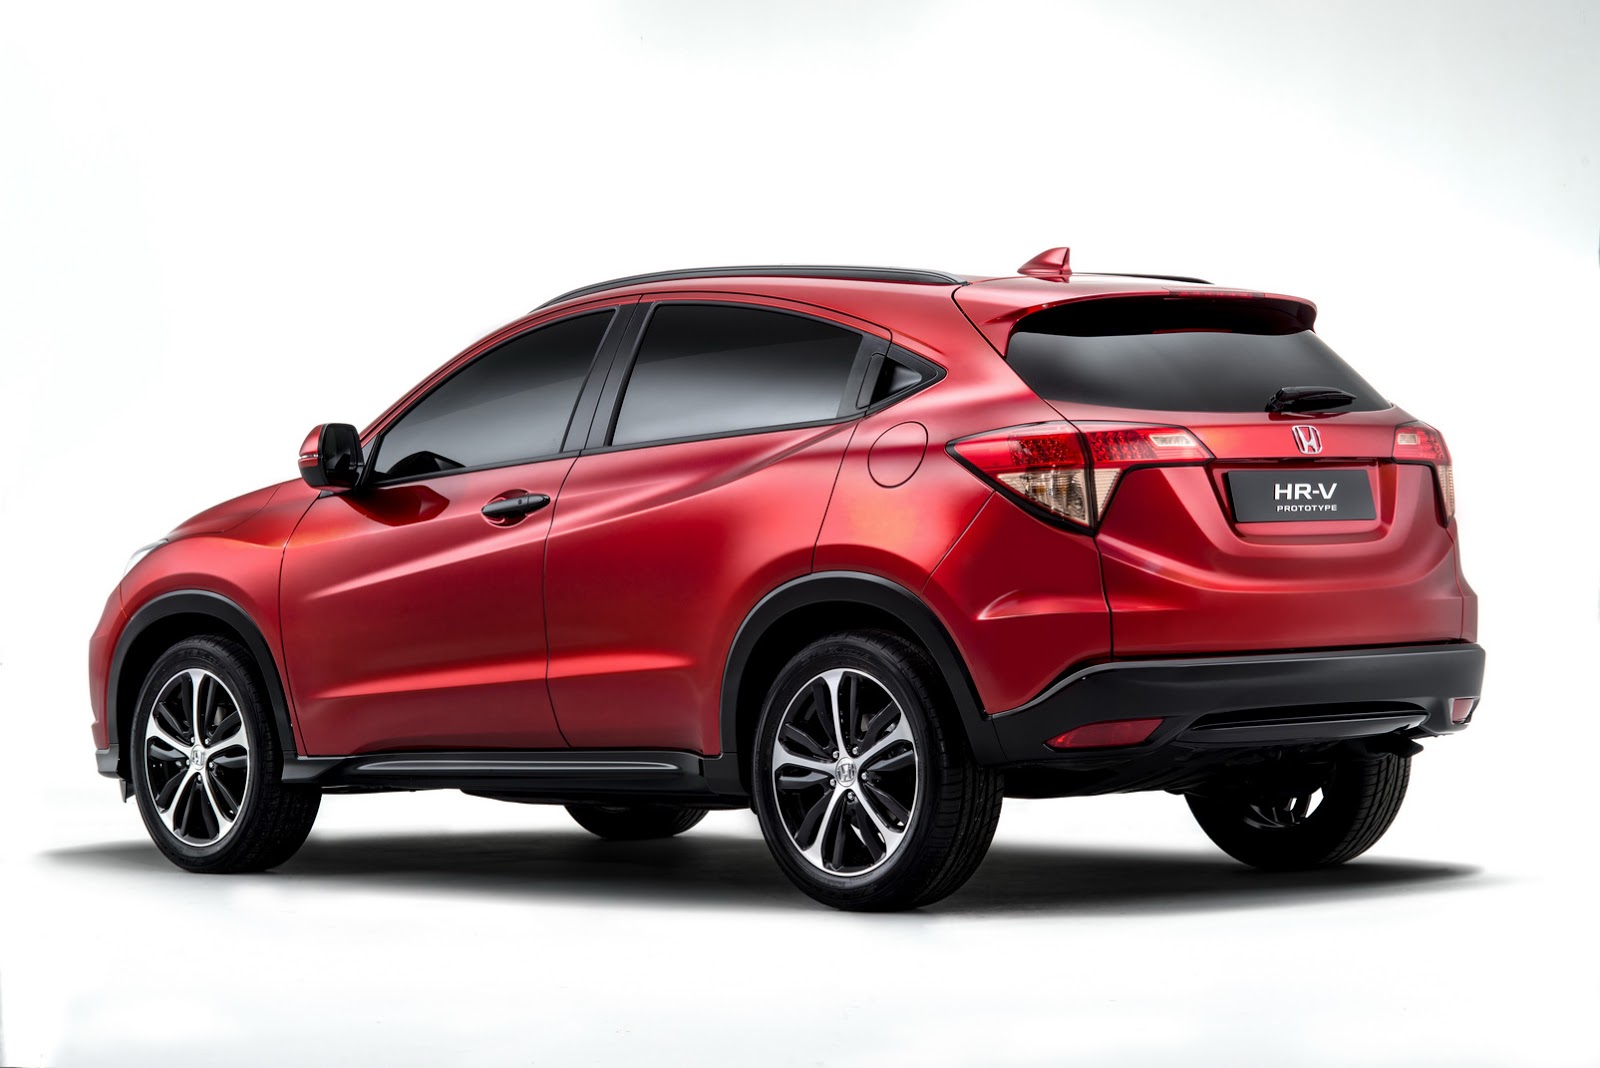 Euro-specific-Honda-HR-V-Set-for-Paris-Debut-wont-come-to-India-2